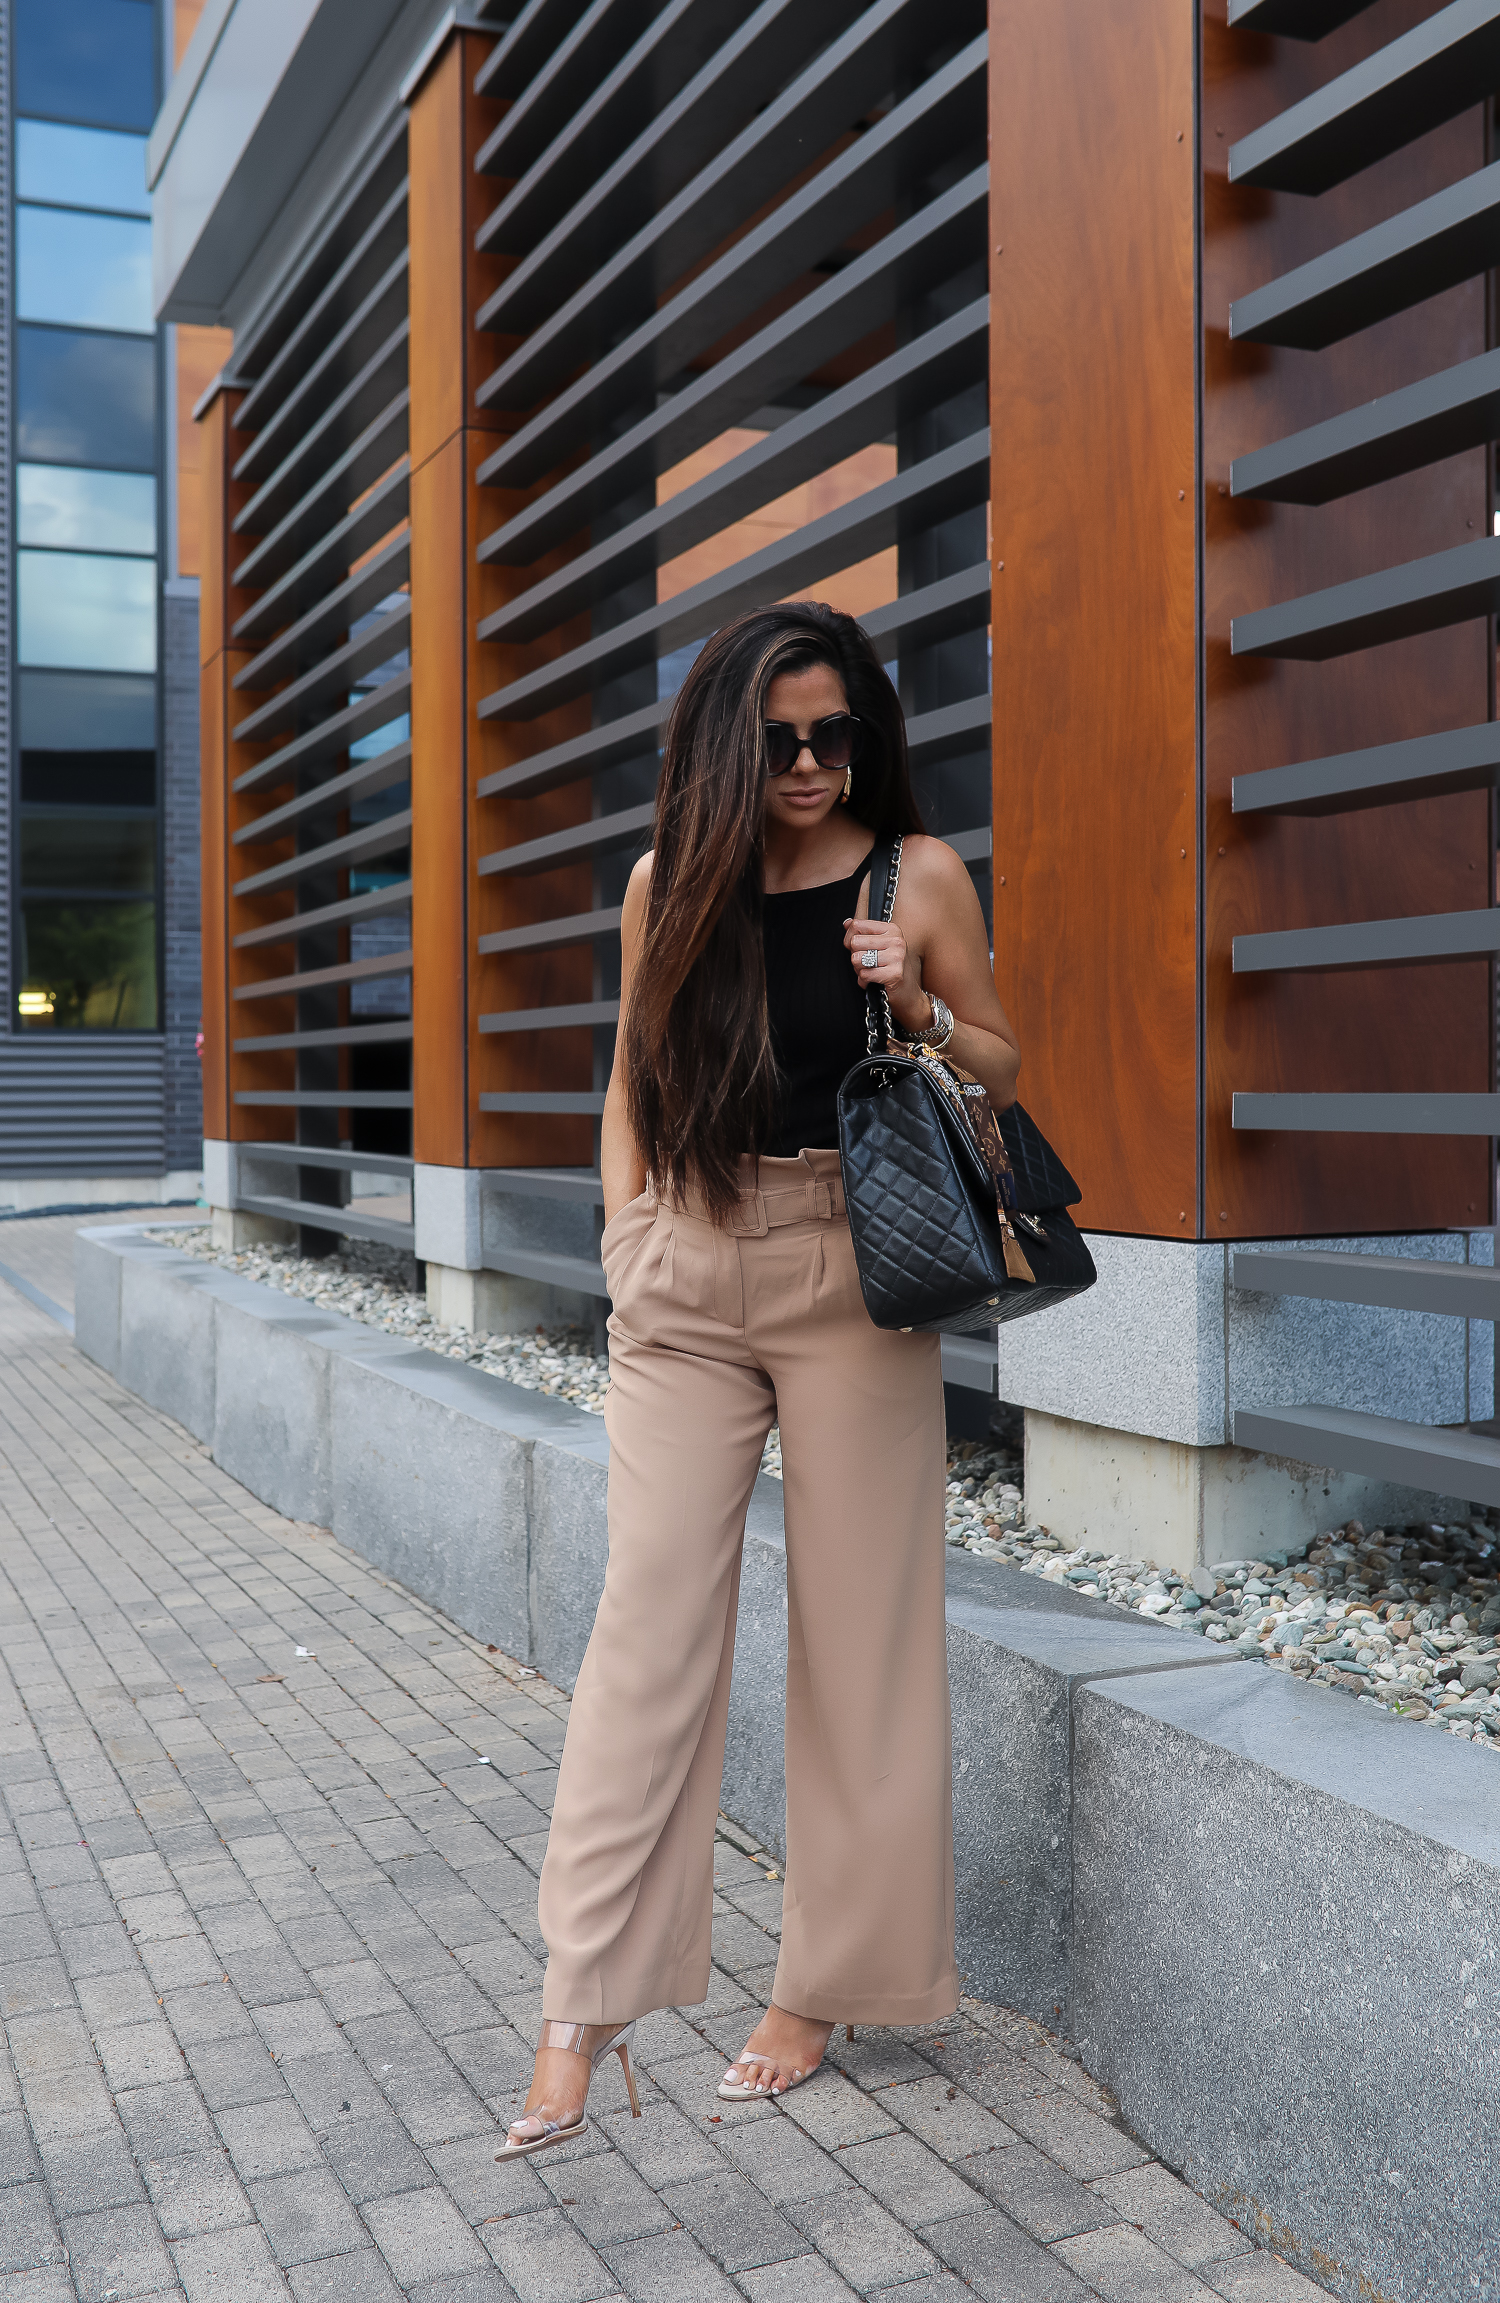 fall fashion outfits pinterest 2019, chanel XXL flap airport bag black, High waisted paper bag pants, emily ann gemma, express fall outfits 2019-2